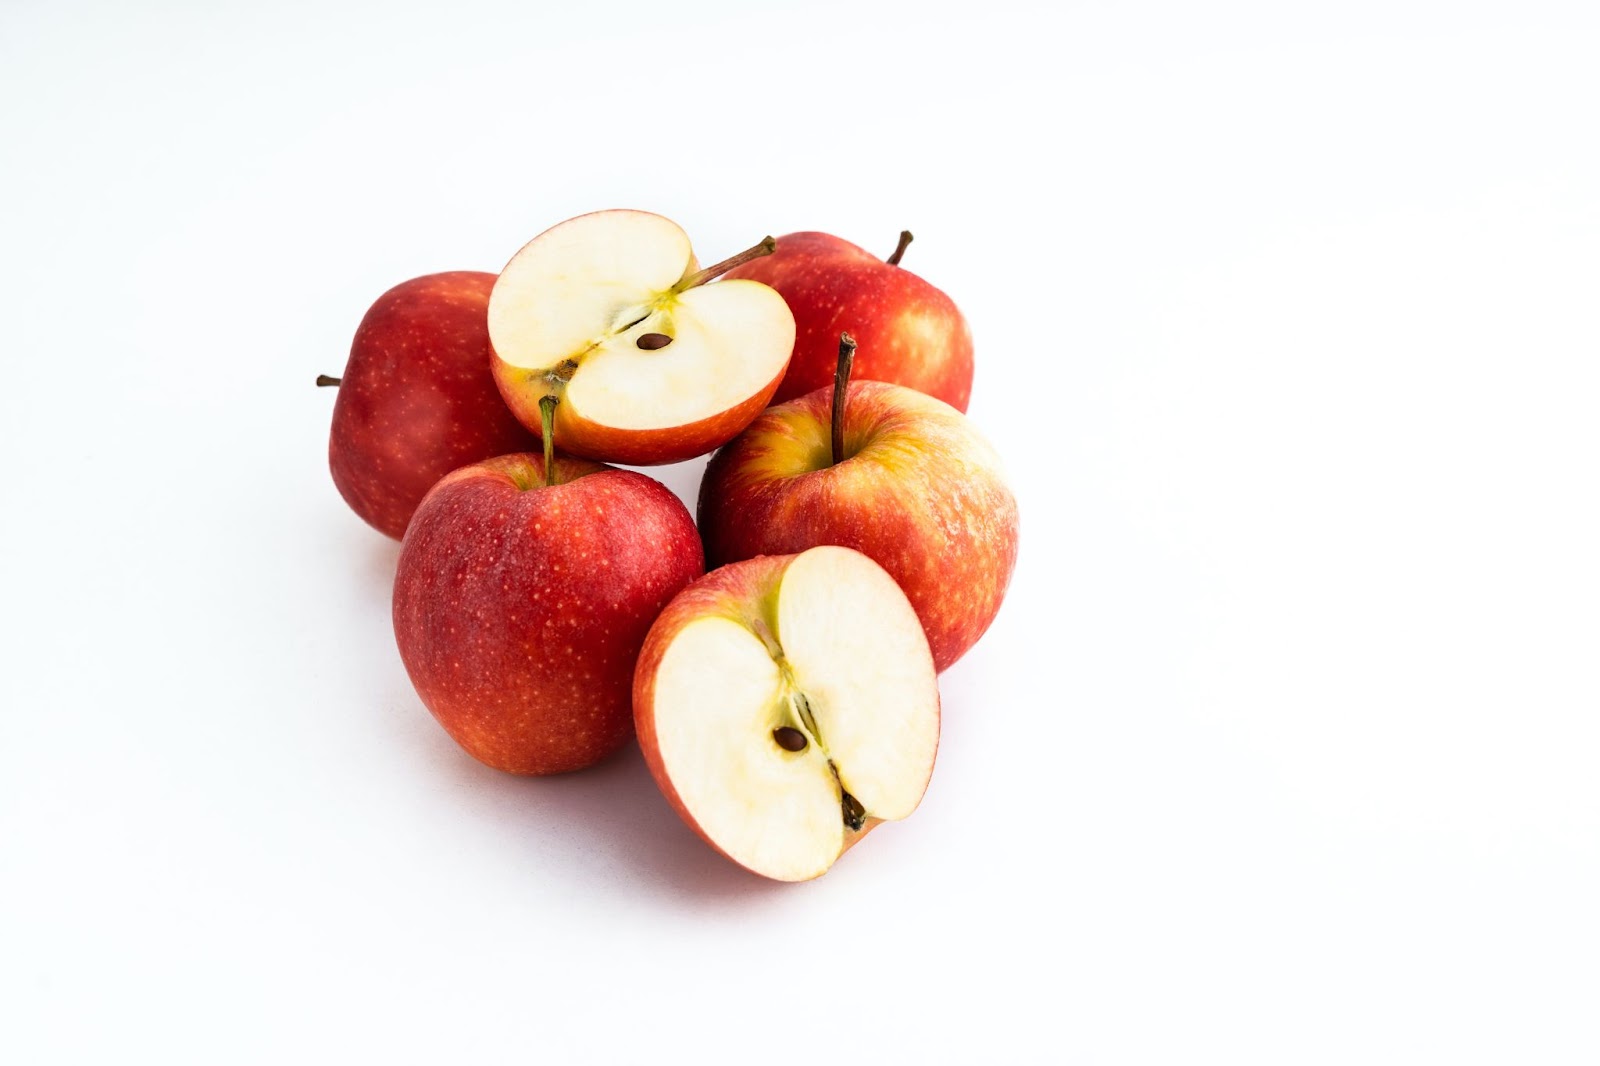 Ambrosia apples more nutritious compared to Fuji apples